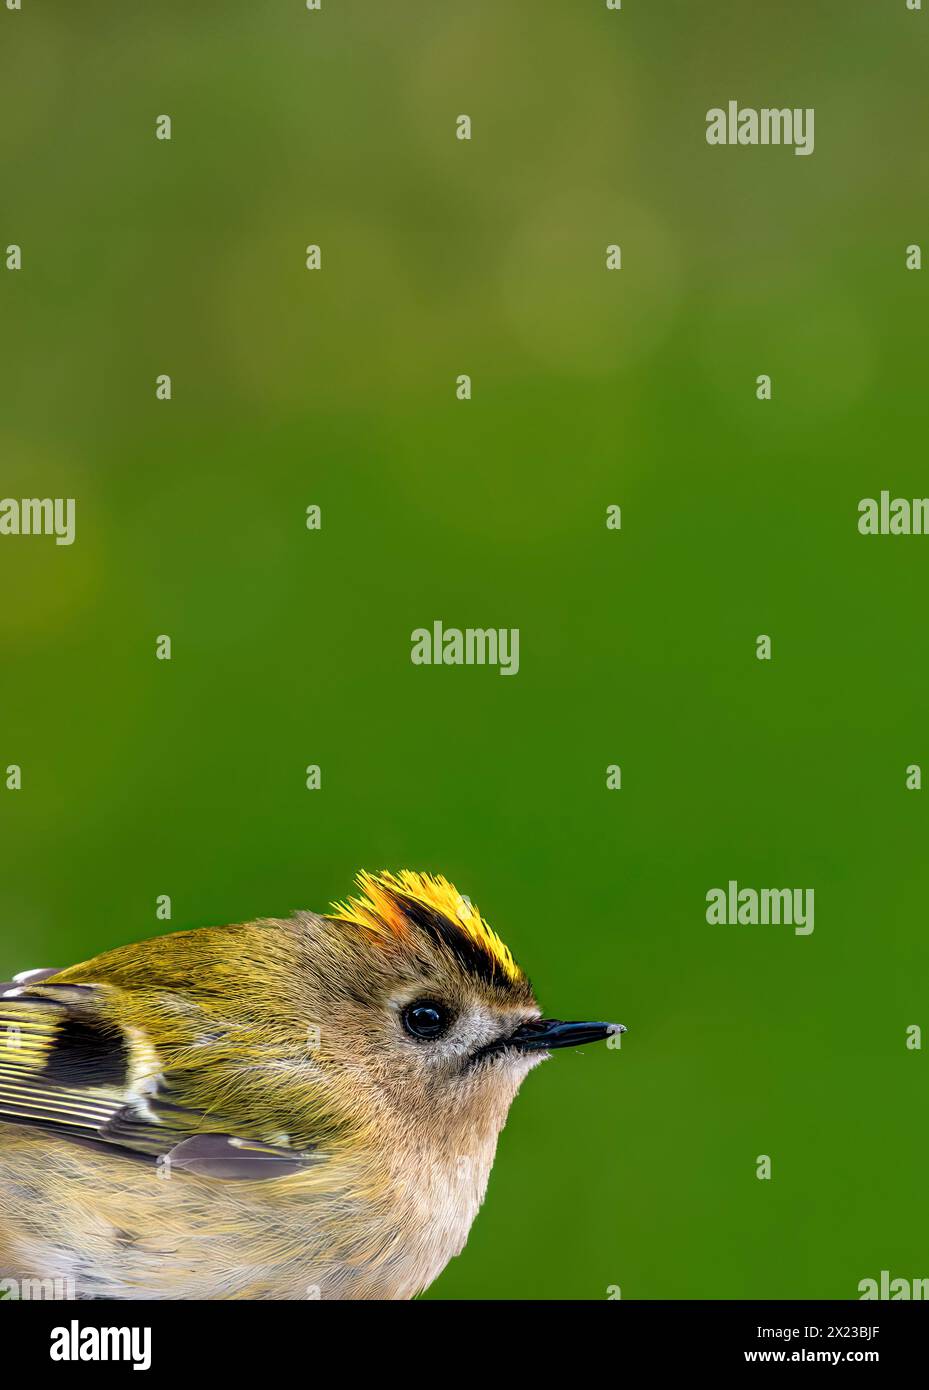 Close-up image of a Goldcrest, or Golden Crowned Kinglet on window against green out of focus grassy background with bokeh Stock Photo